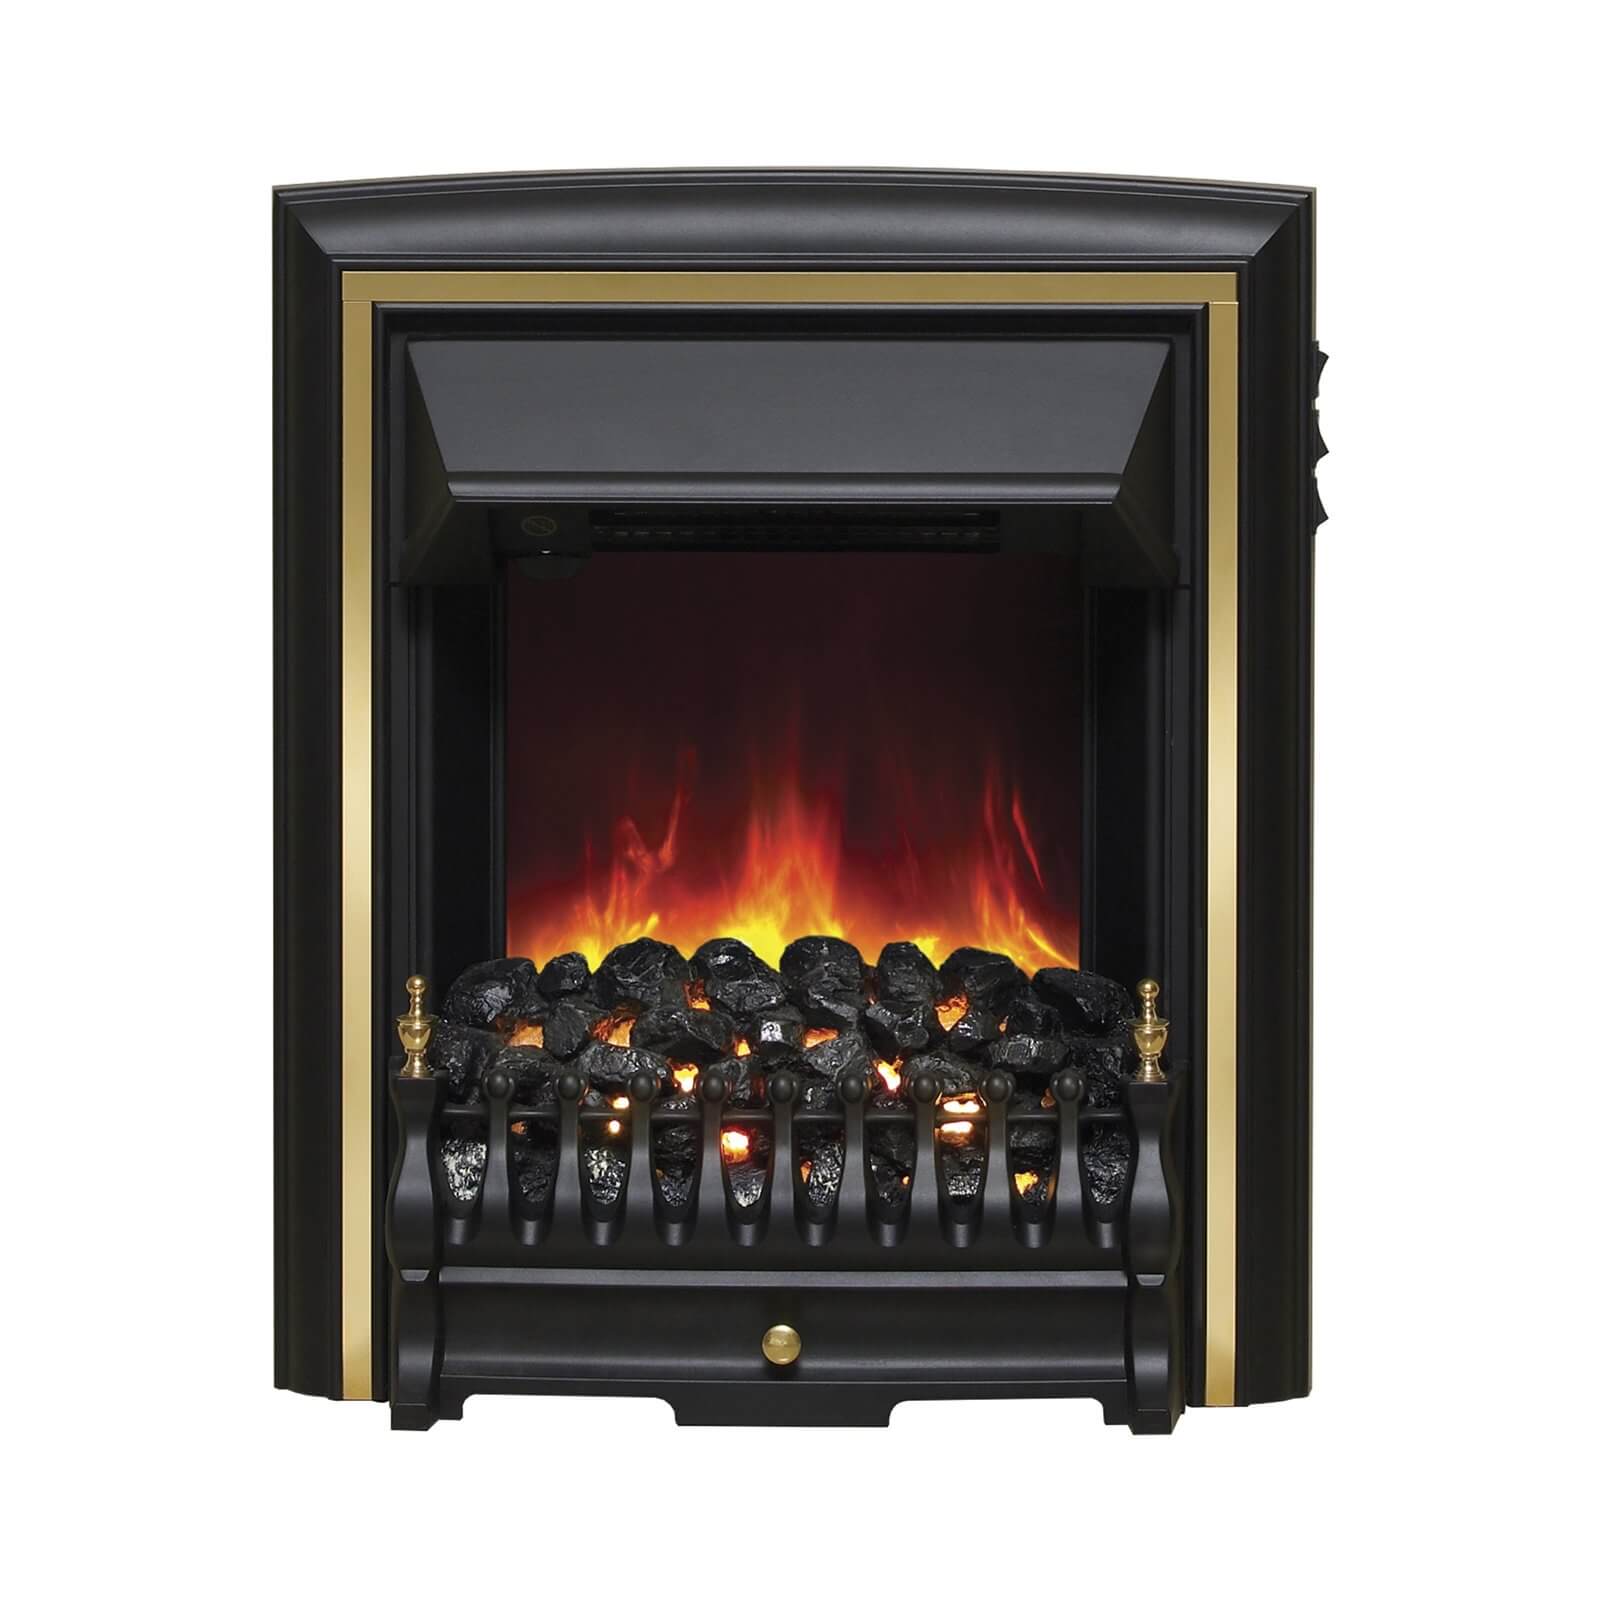 Be Modern Daytona Electric Fire with Inset Fitting - Black & Brass